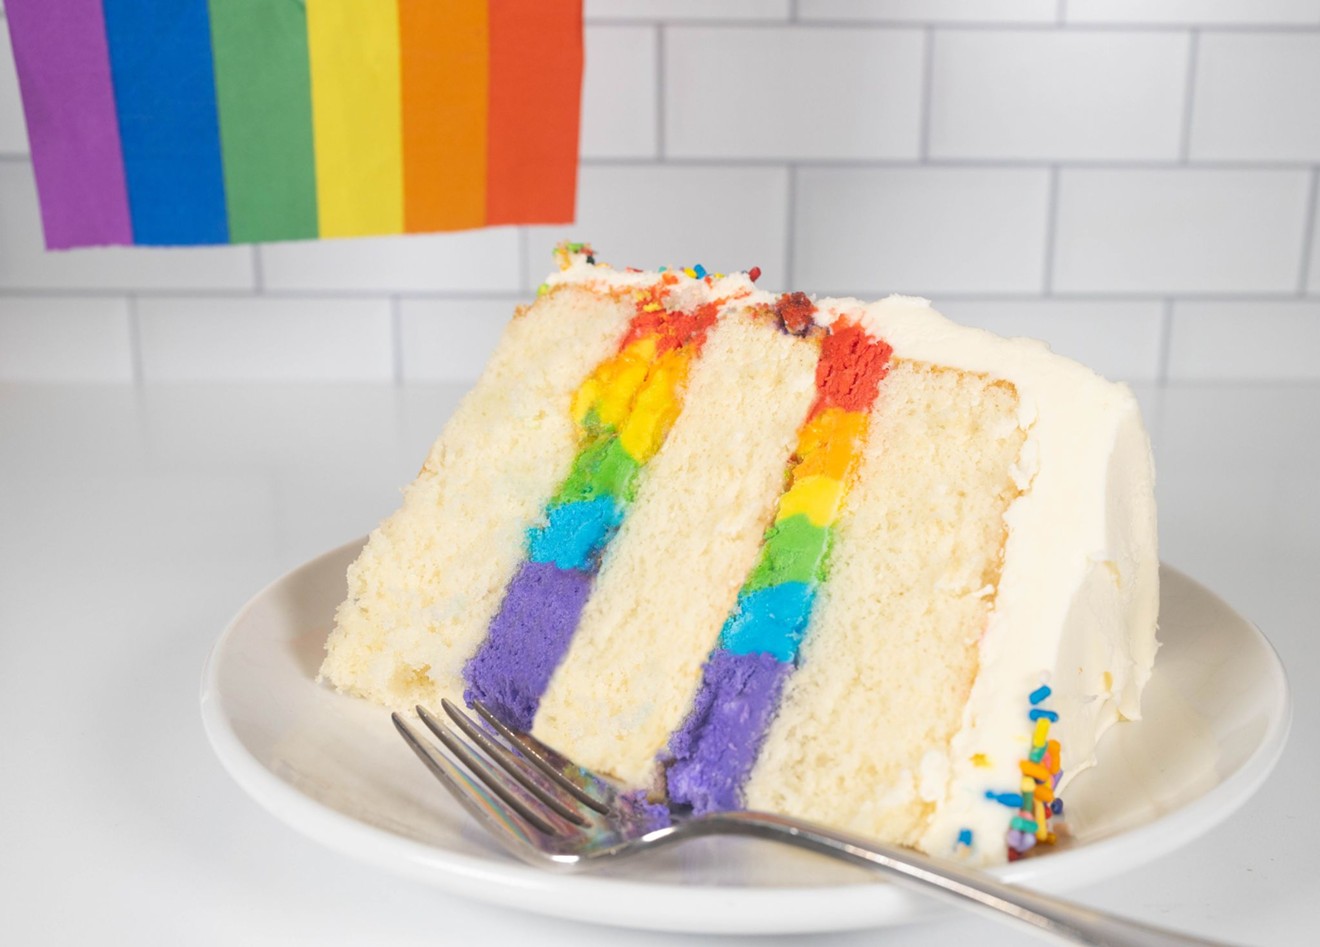 Dessert Gallery is offering a "Slice of Pride" this June.